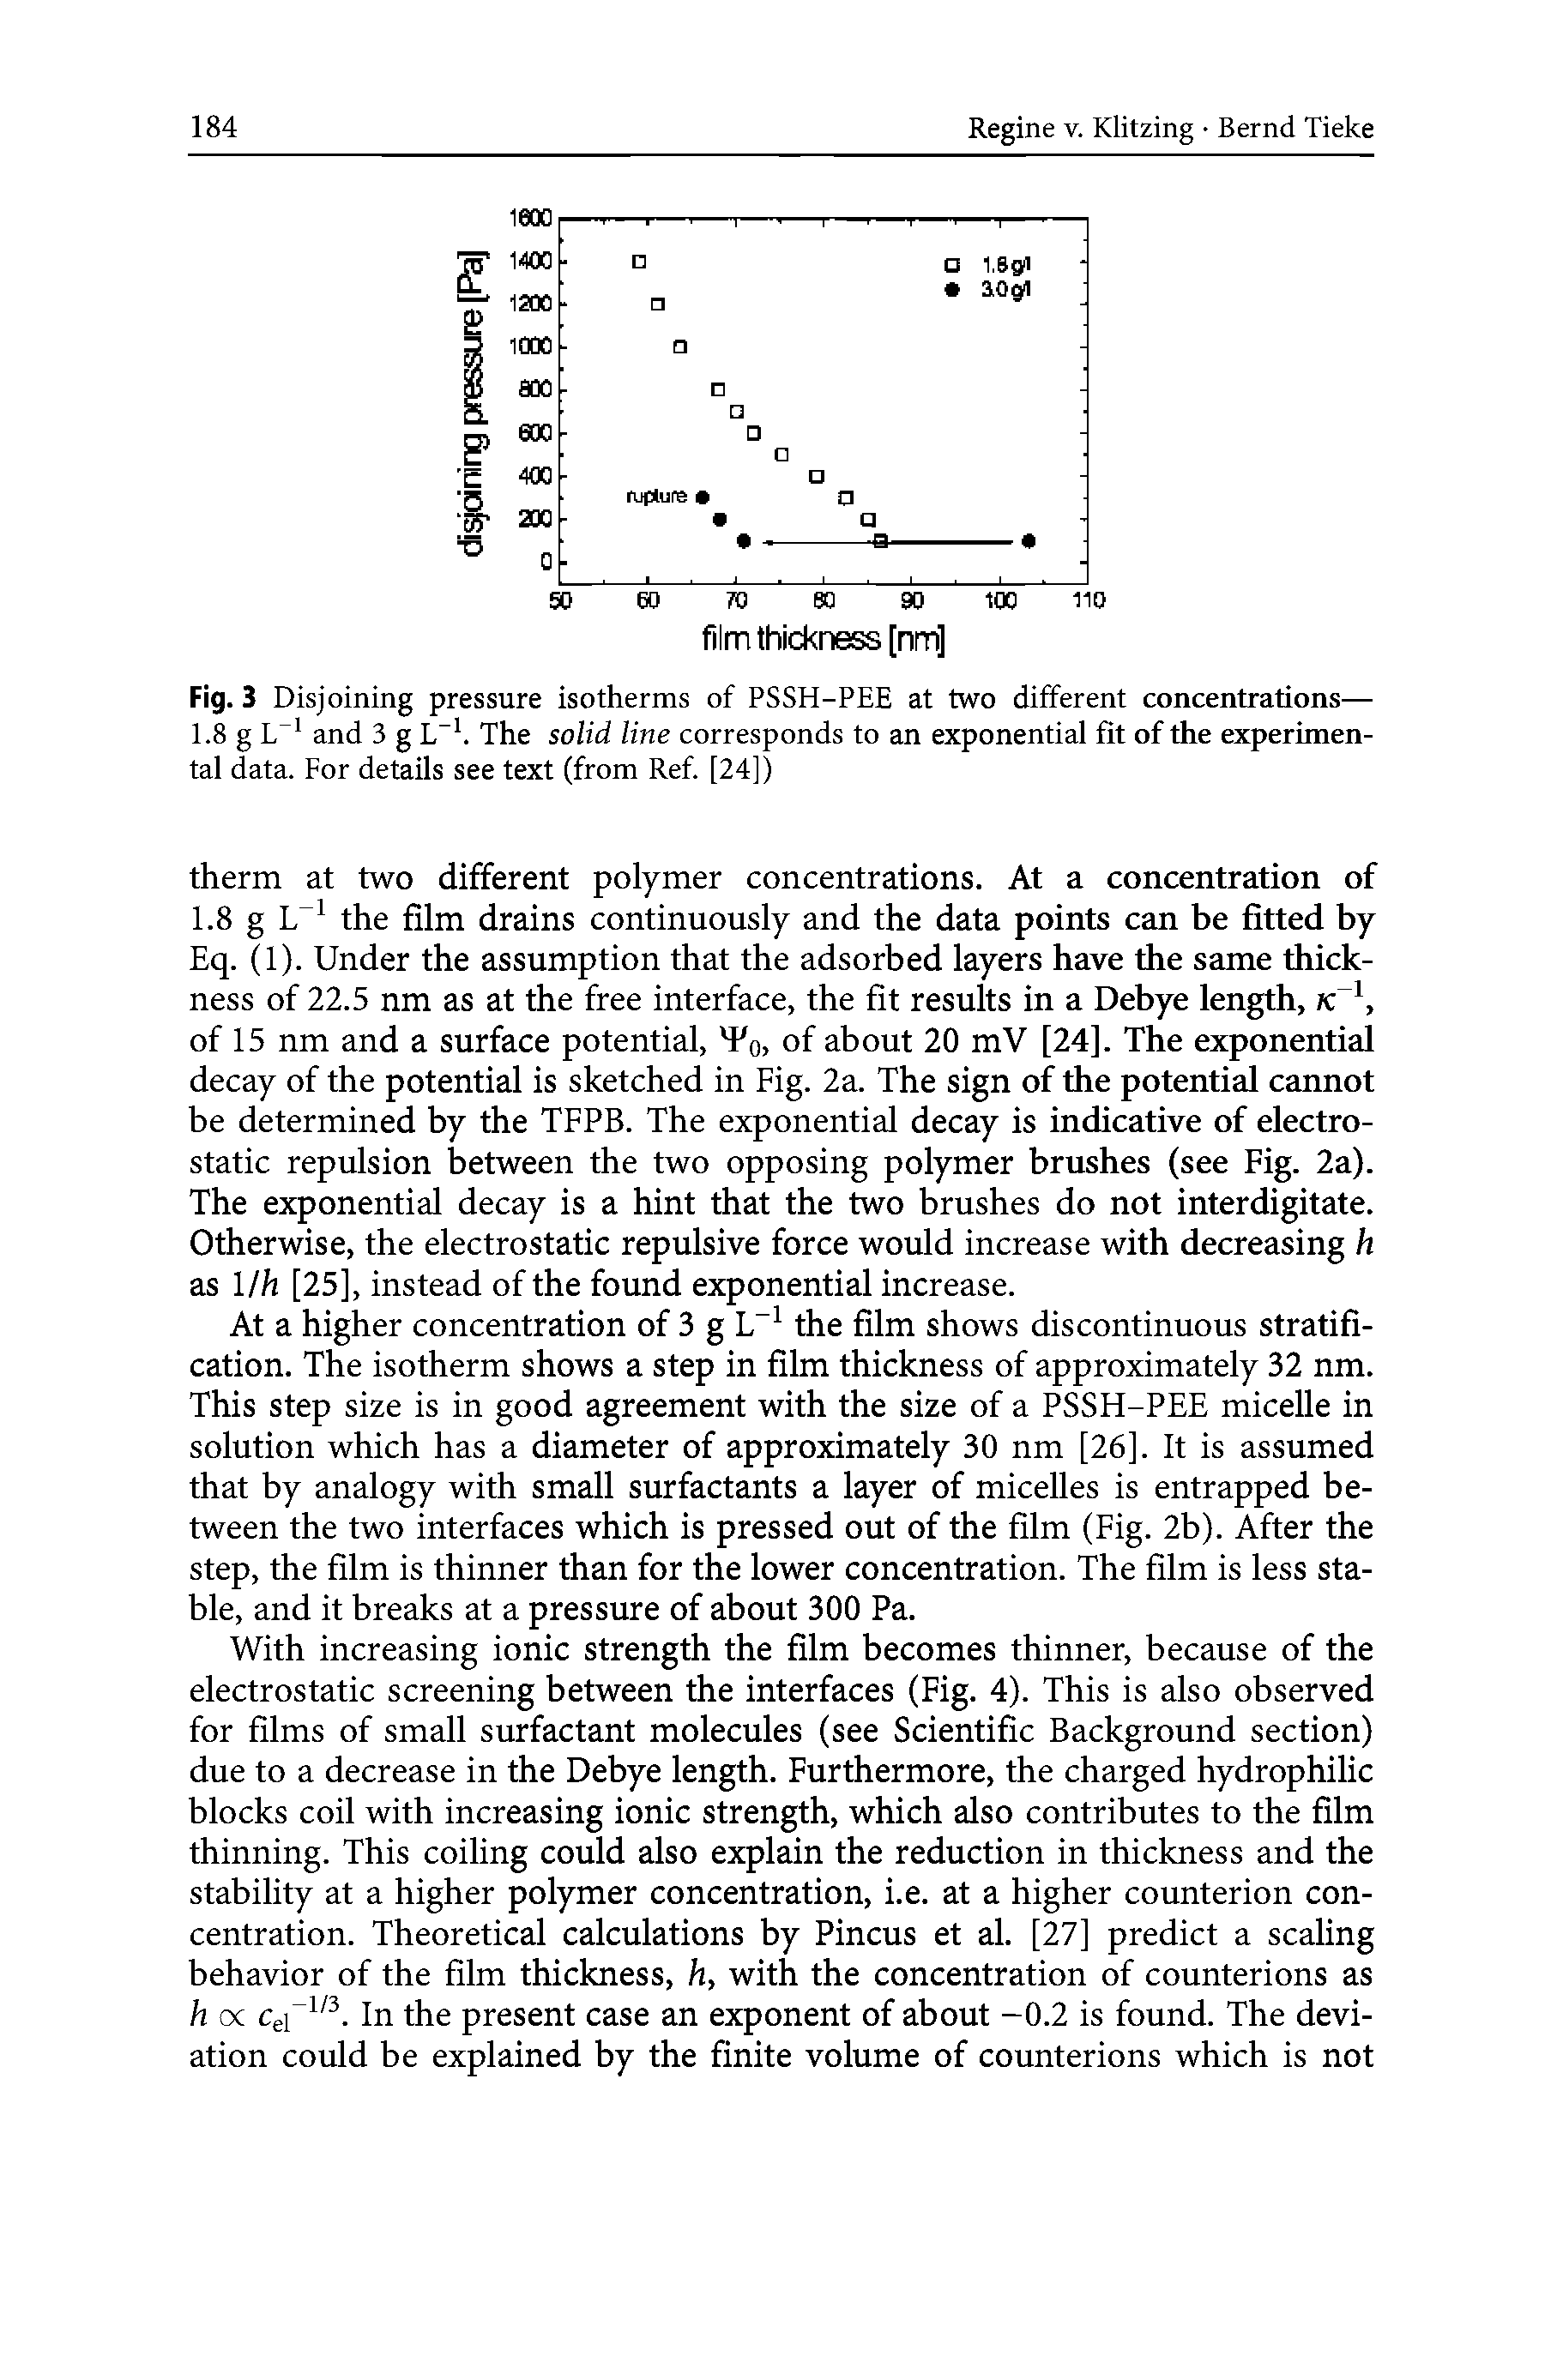 Fig. 3 Disjoining pressure isotherms of PSSH-PEE at two different concentrations— 1.8 g L 1 and 3 g L 1. The solid line corresponds to an exponential fit of the experimental data. For details see text (from Ref. [24])...